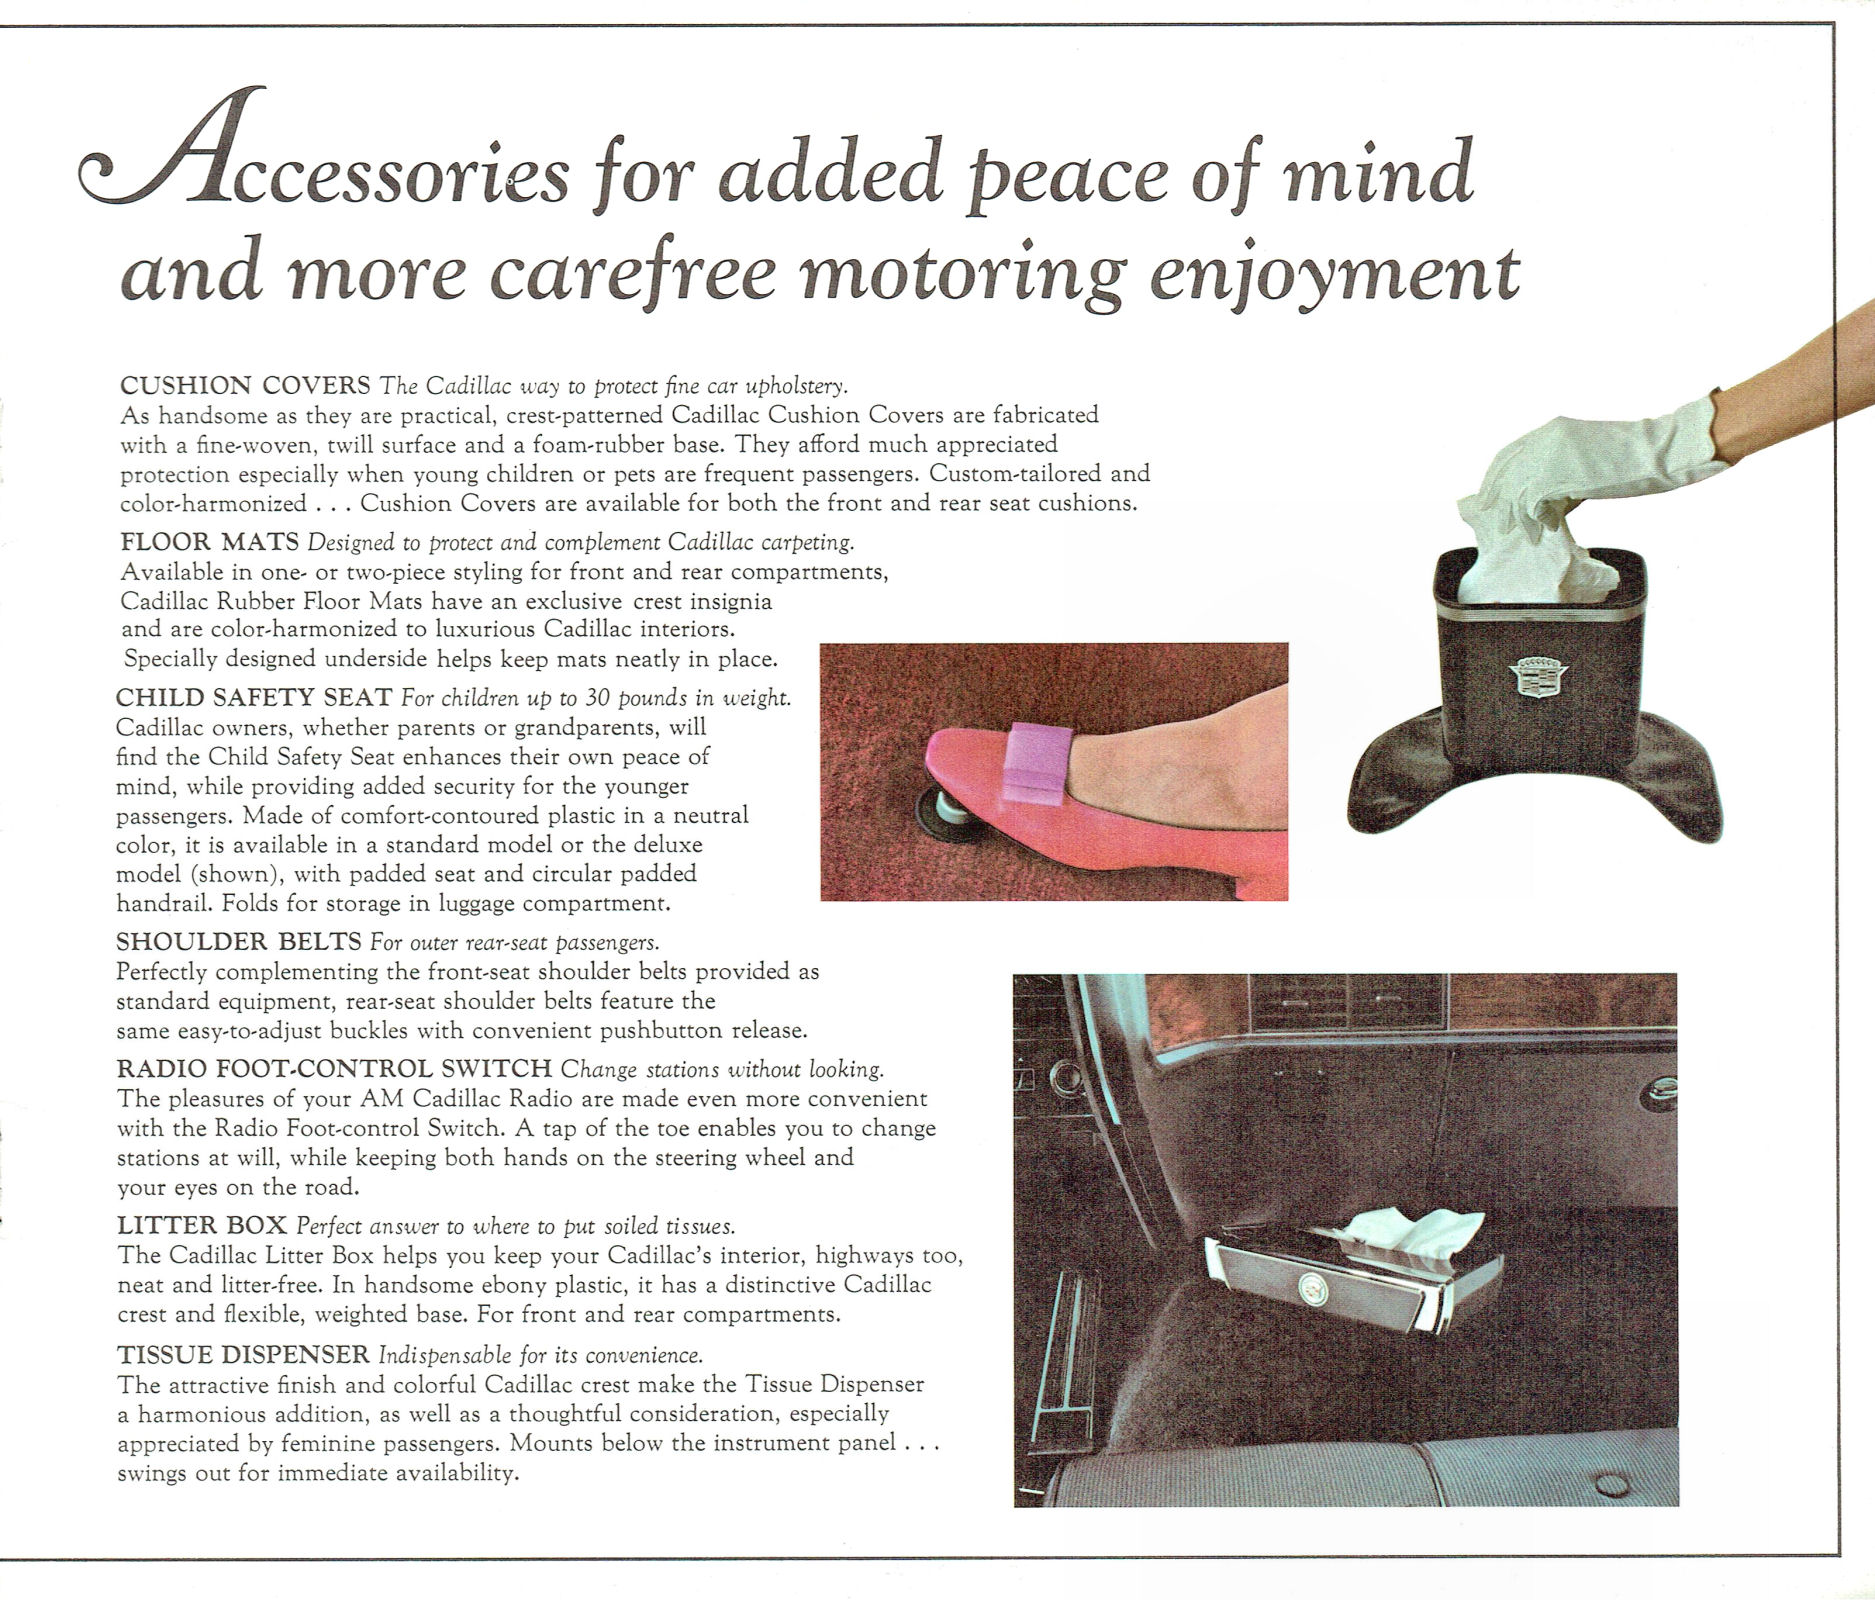 1969 Cadillac Accessories (TP).pdf-2023-12-9 13.51.10_Page_3